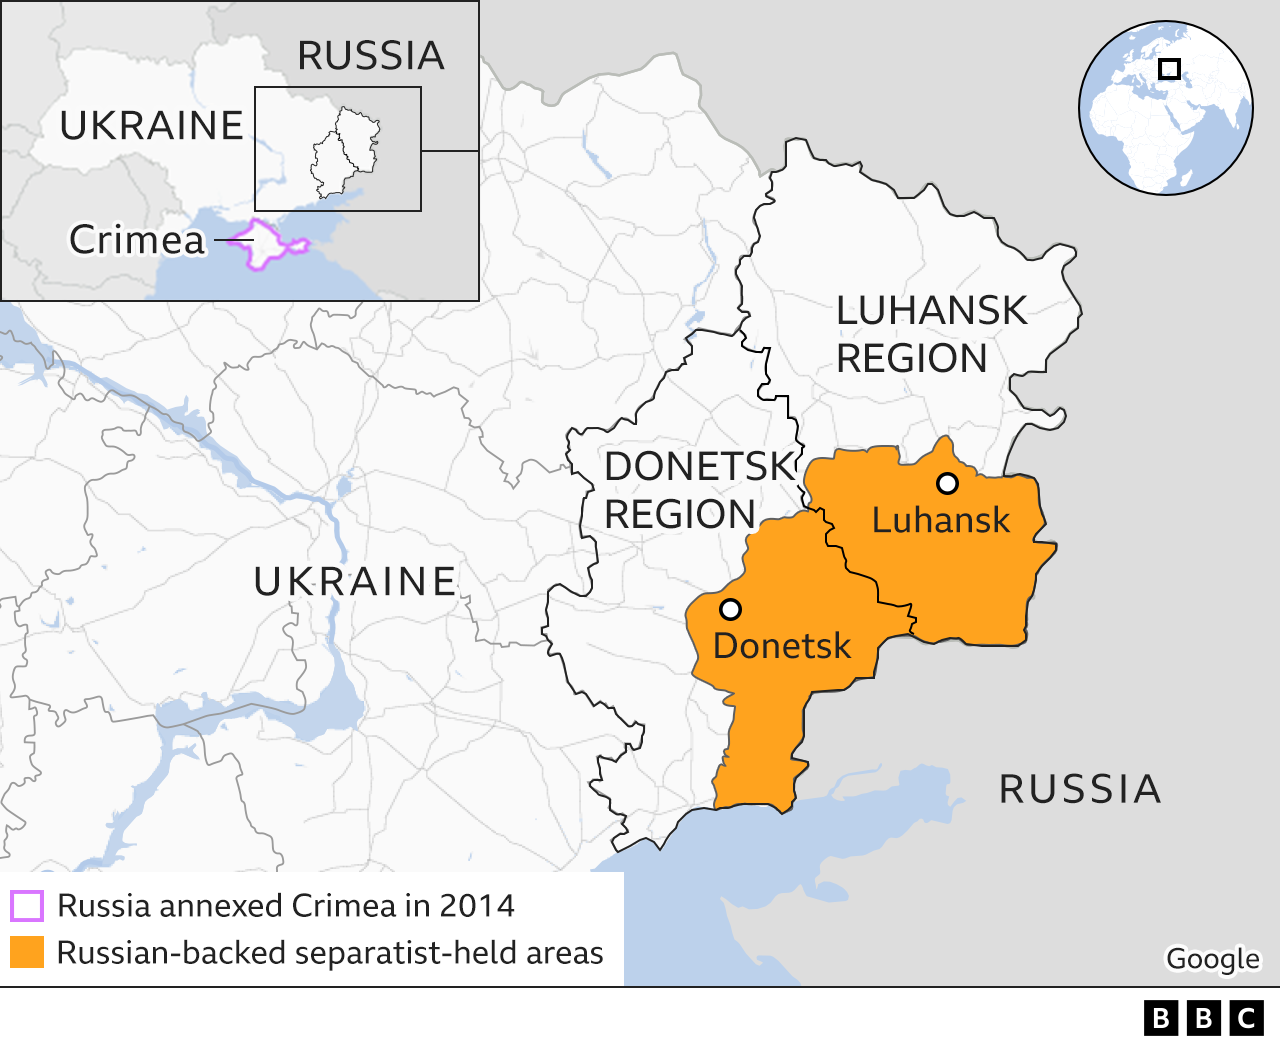 Map showing the Donetsk and Luhansk regions in eastern Ukraine and the Russian-backed separatist-held areas within those regions.